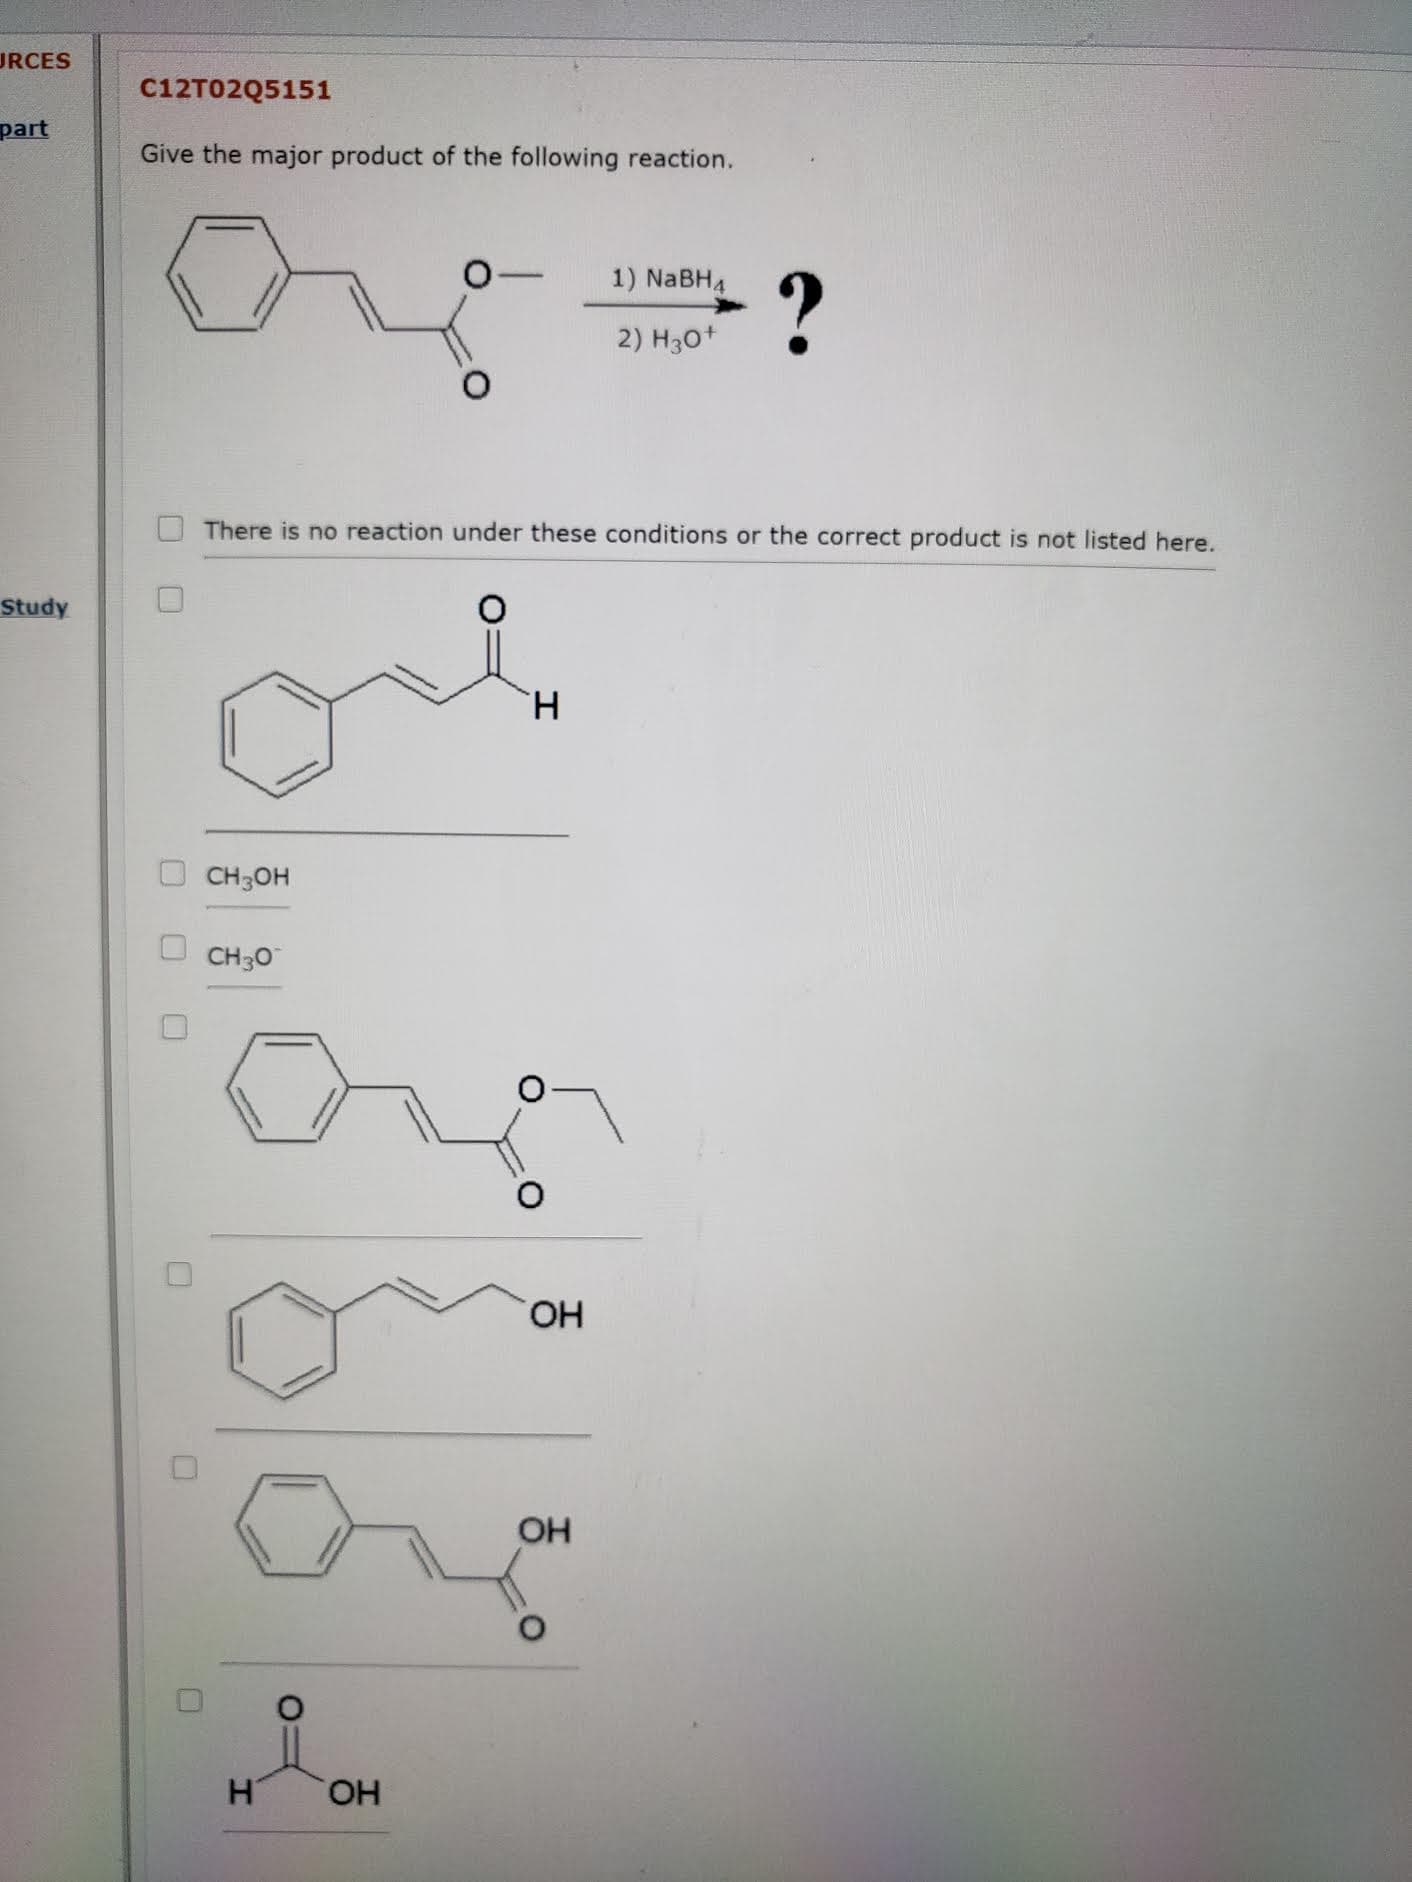 Give the major product of the following reaction.
1) NABH4
2) H30+
There is no reaction under these conditions or the correct product is not listed here.
H.
CH3OH
CH30
O-
HO.
OH
